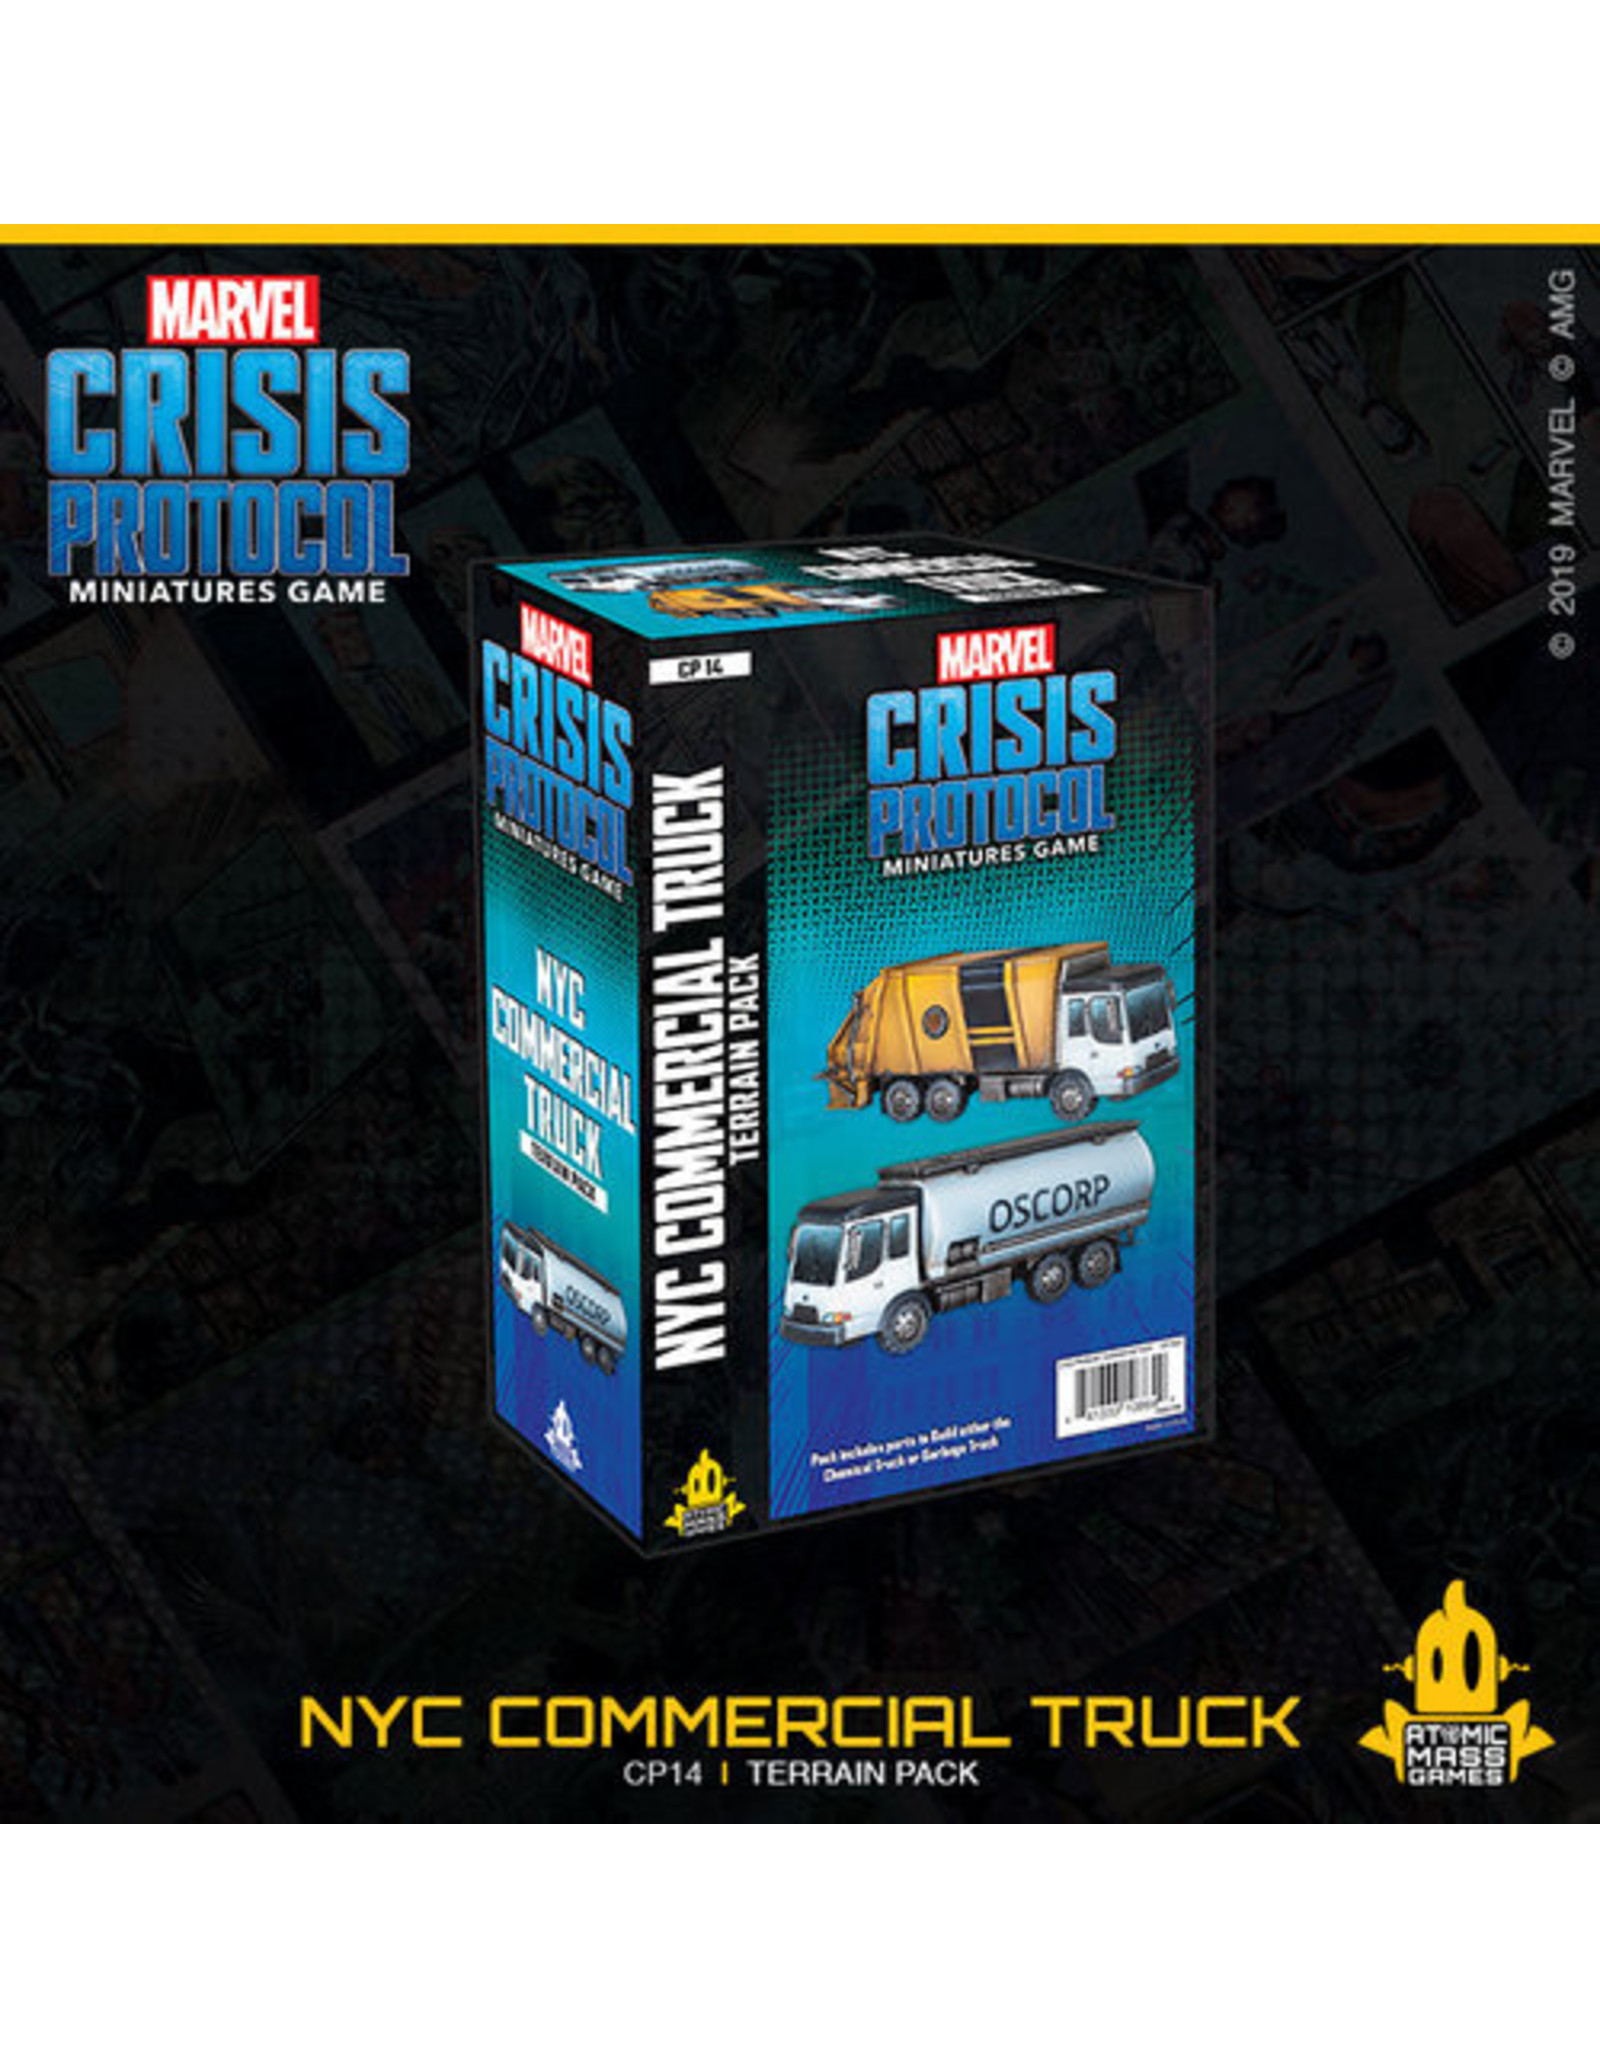 Atomic Mass Games NYC Commercial Truck Terrain Pack - Marvel Crisis Protocol